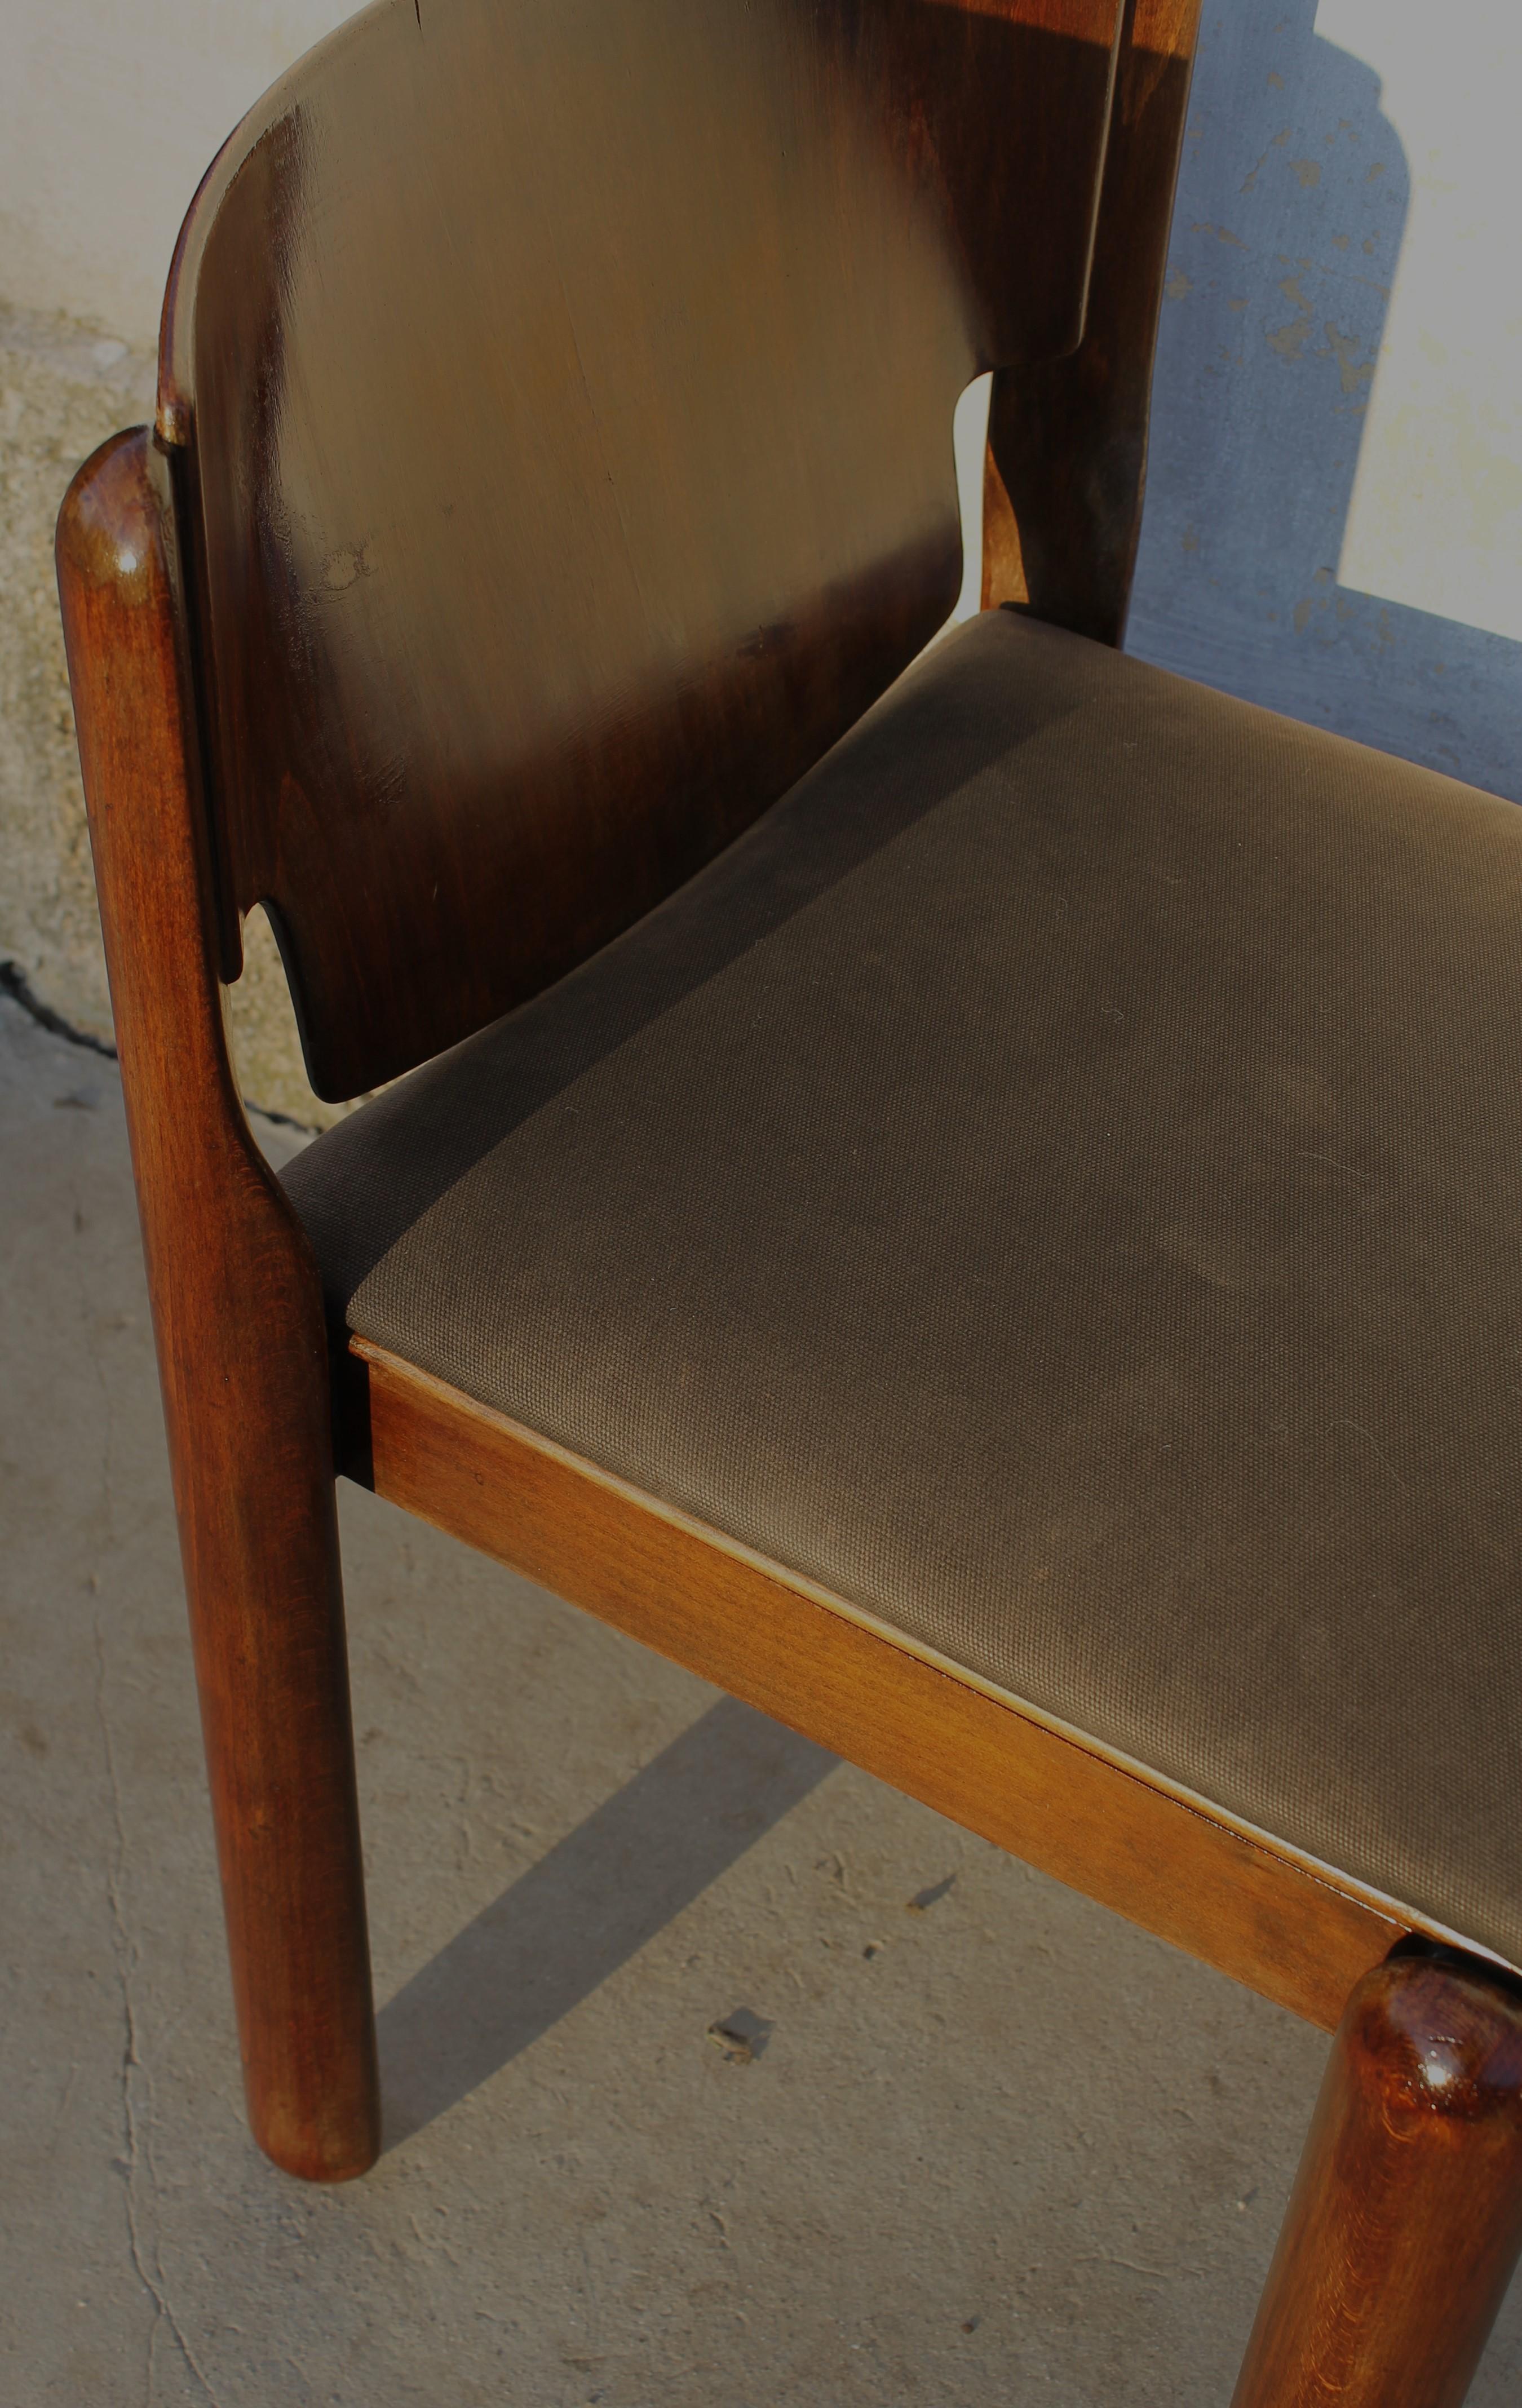 Fabric  Cassina walnut chair Mod. 122 by Vico Magistretti Italy 60s (six available) For Sale